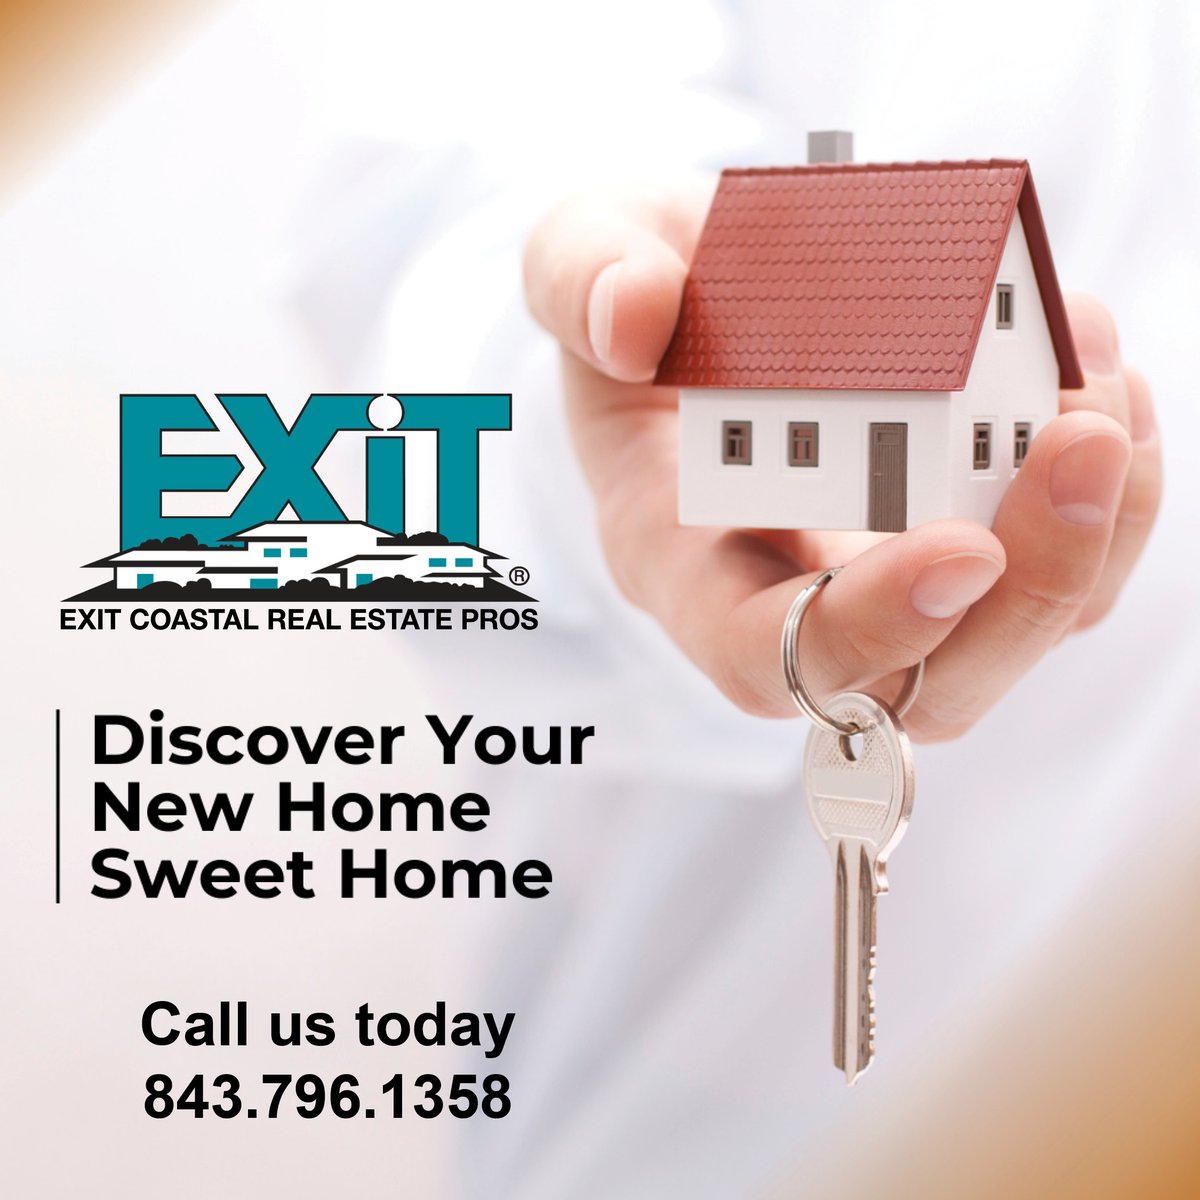 Discover your new home sweet home with EXIT Coastal Real Estate Pros!

#EXITCoastalRealEstatePros #EXITRealEstate #SCHomes #RealEstate #SoldWithStyle #HomeBuyingMadeEasy #EXITRealty #EXITCRP #MyrtleBeachRealEstate #EXITRealtyIsGrowing #EXITisEverywhere #LoveEXIT...